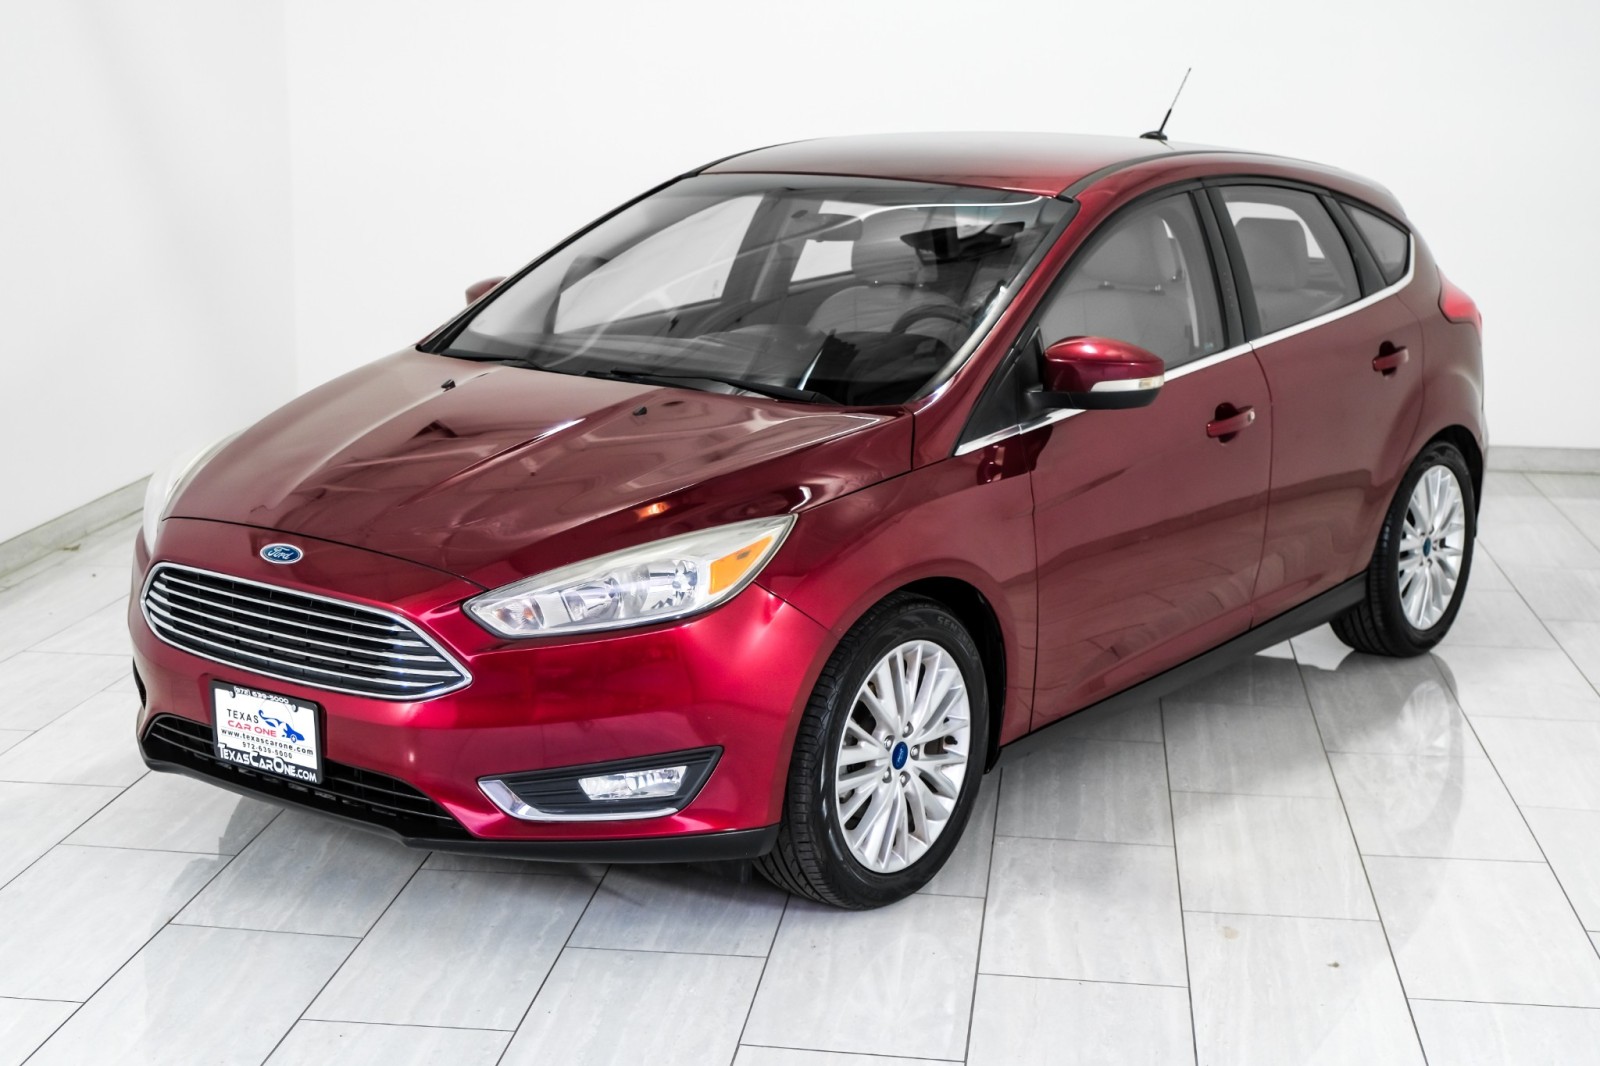 2016 Ford Focus TITANIUM HATCH AUTOMATIC LEATHER HEATED SEATS REAR 7